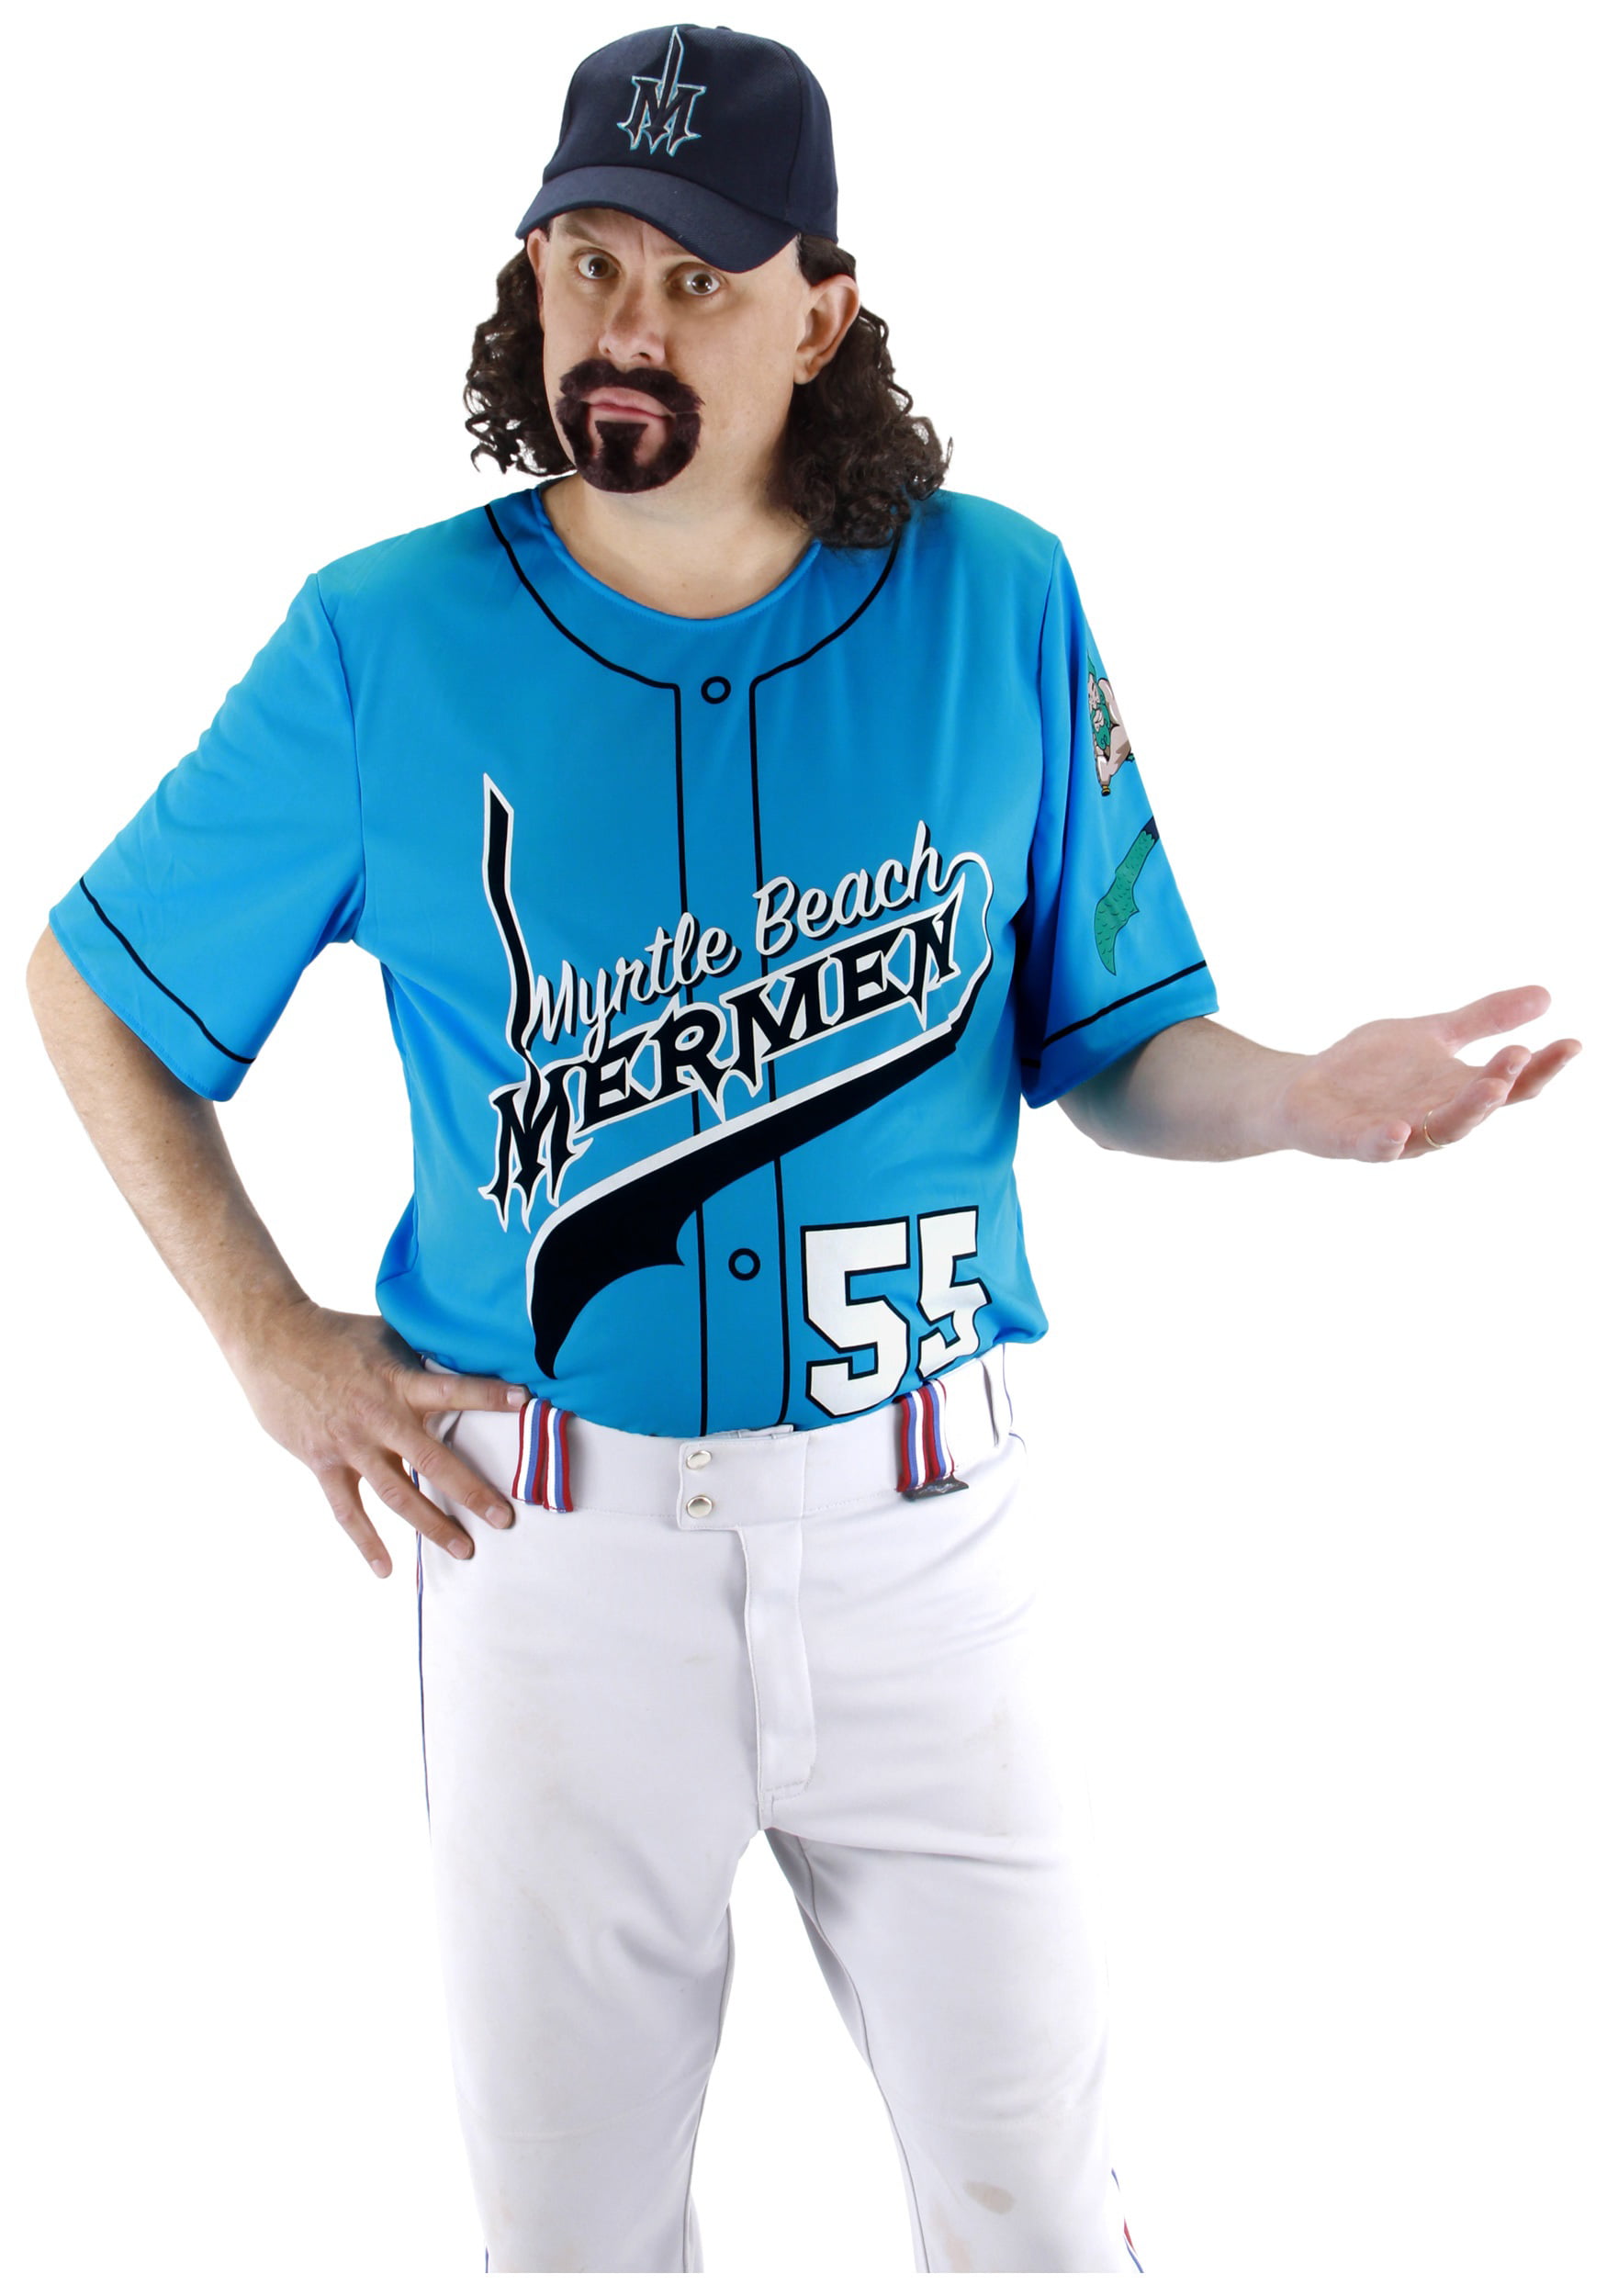 Powers pictures kenny Kenny Powers